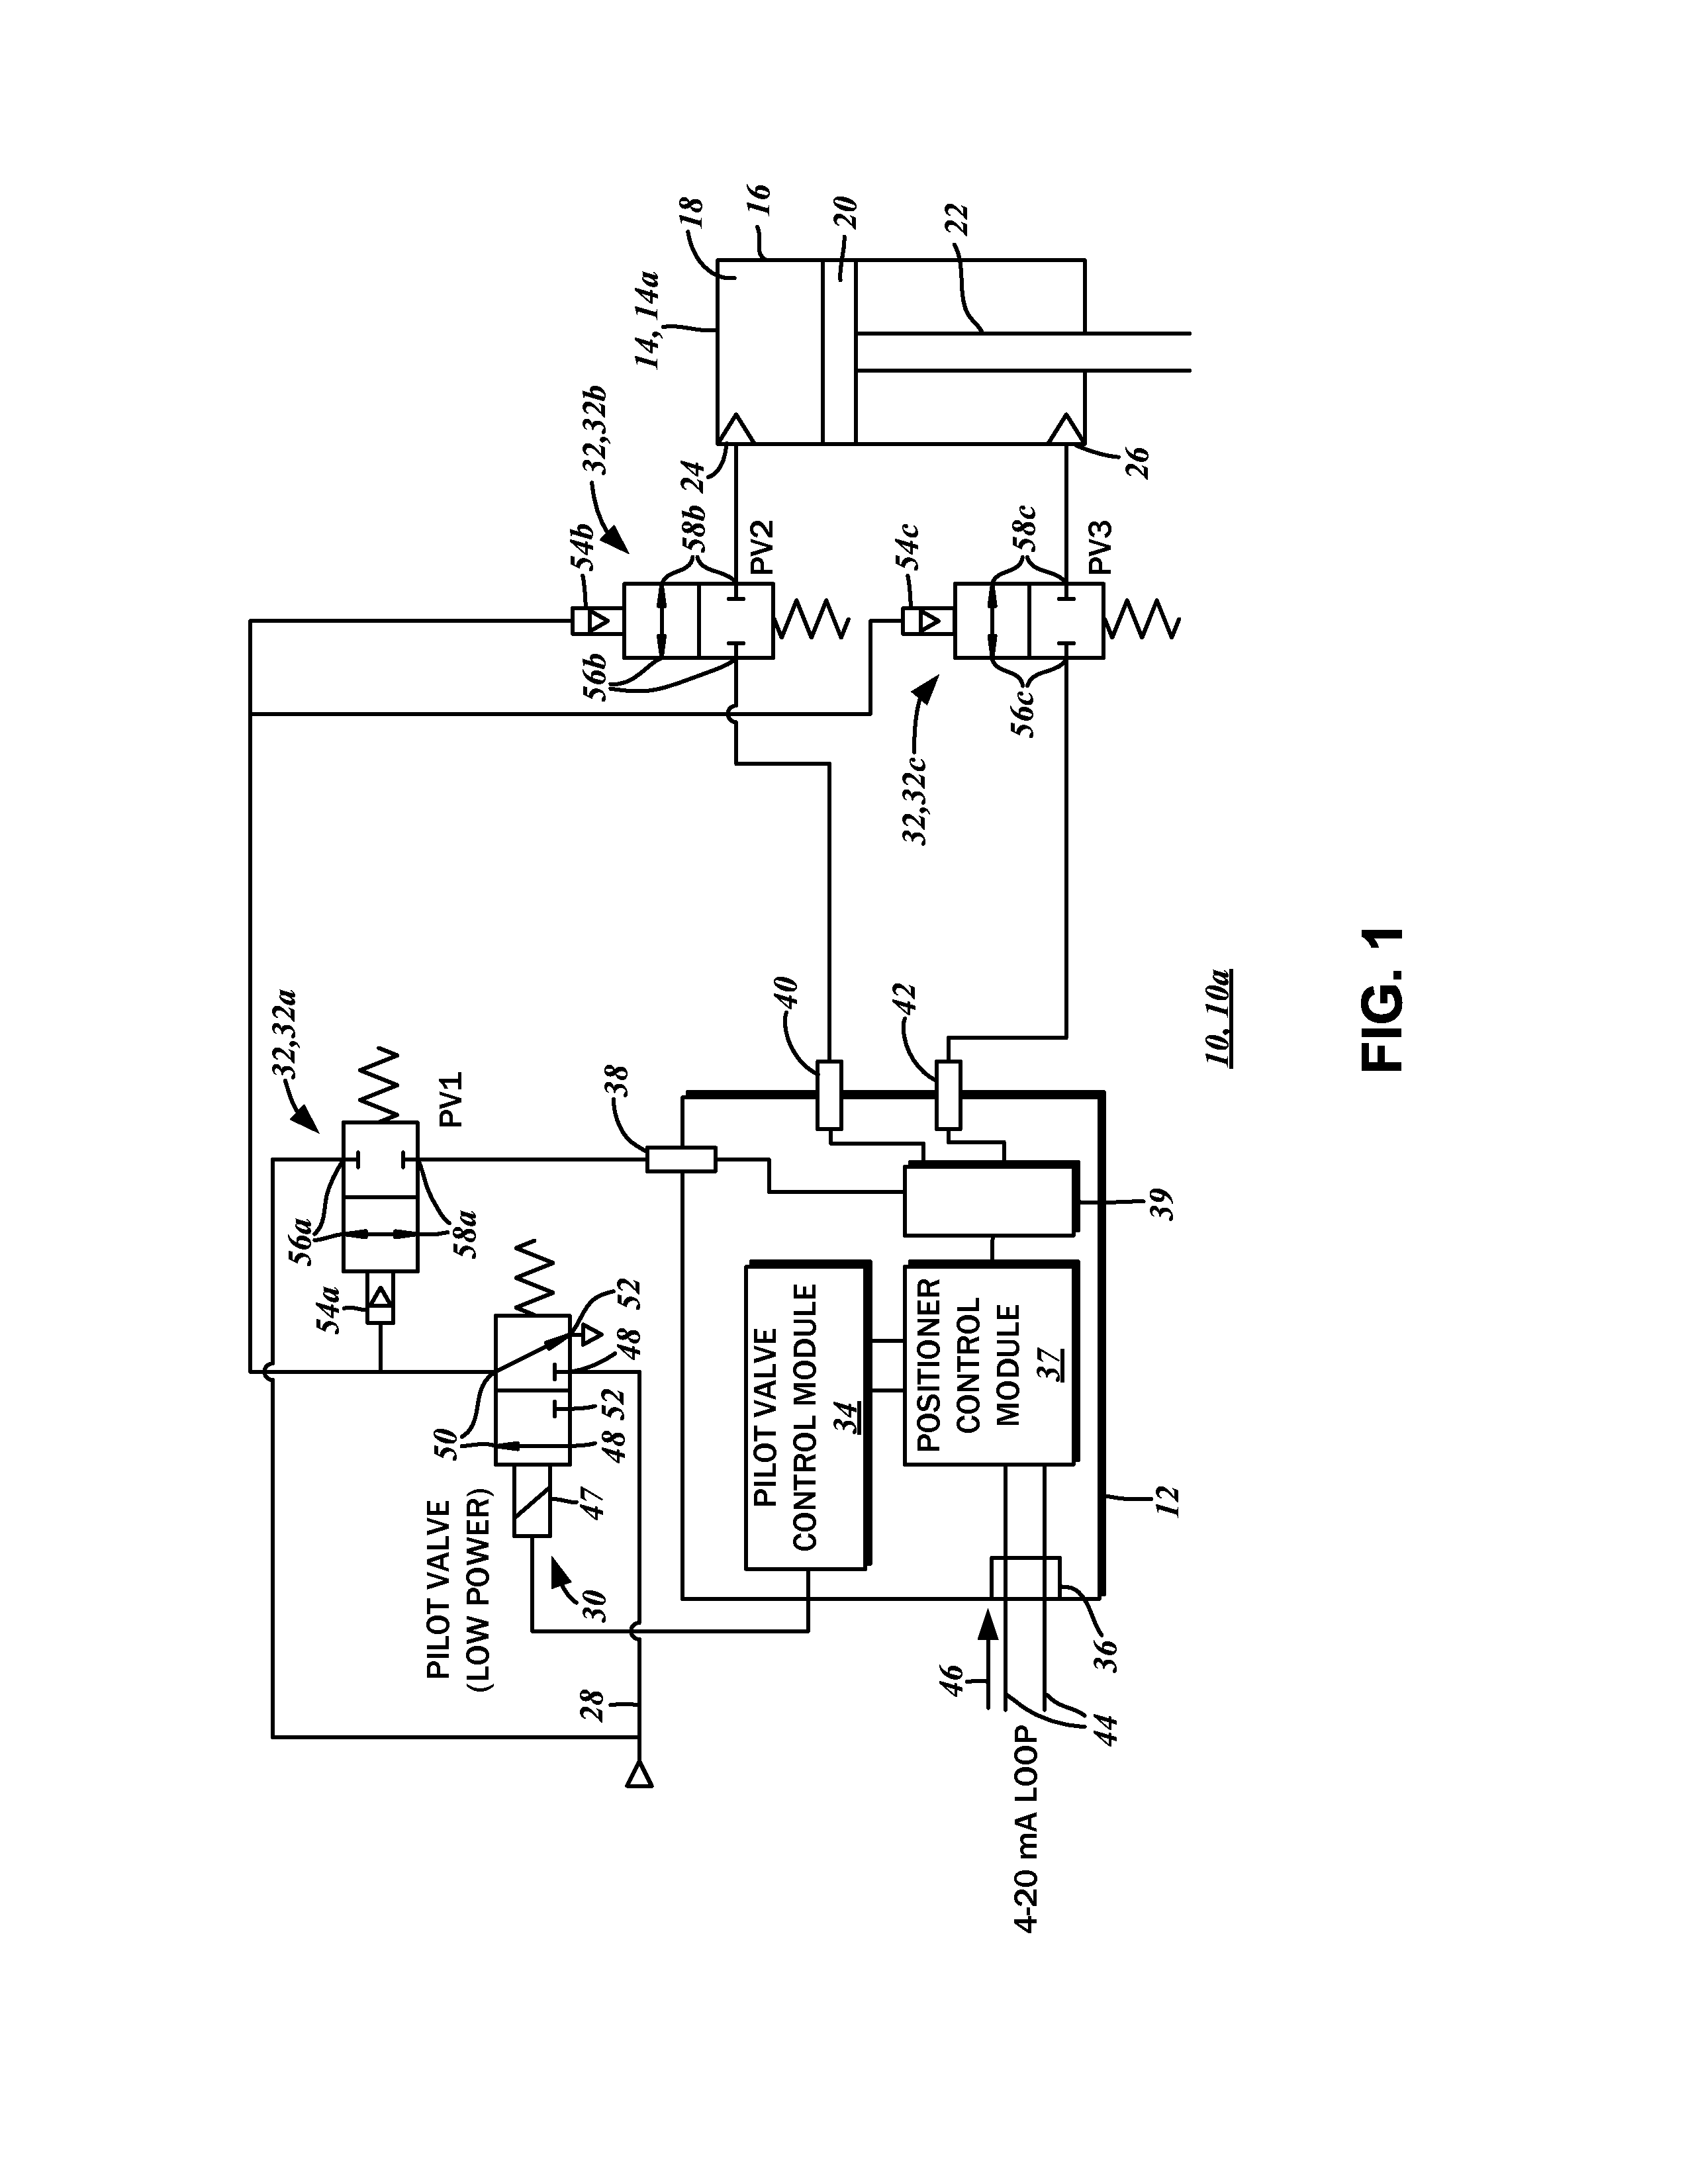 Valve positioning system with bleed prevention